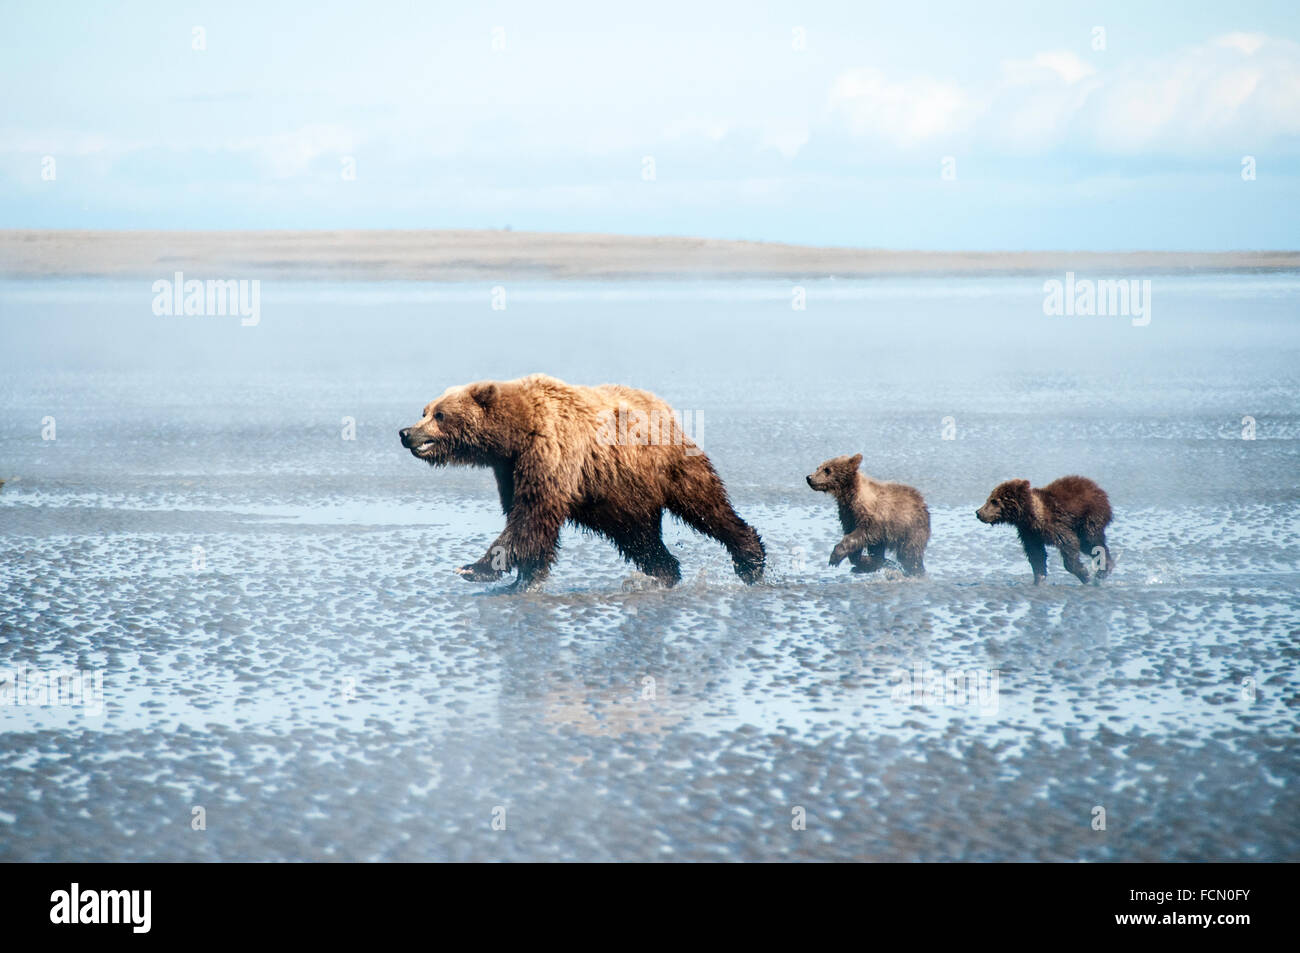 Three Grizzly Bears, Ursus arctos, mother and two Spring Cubs, running across the tidal flats of the Cook Inlet, Alaska, USA Stock Photo